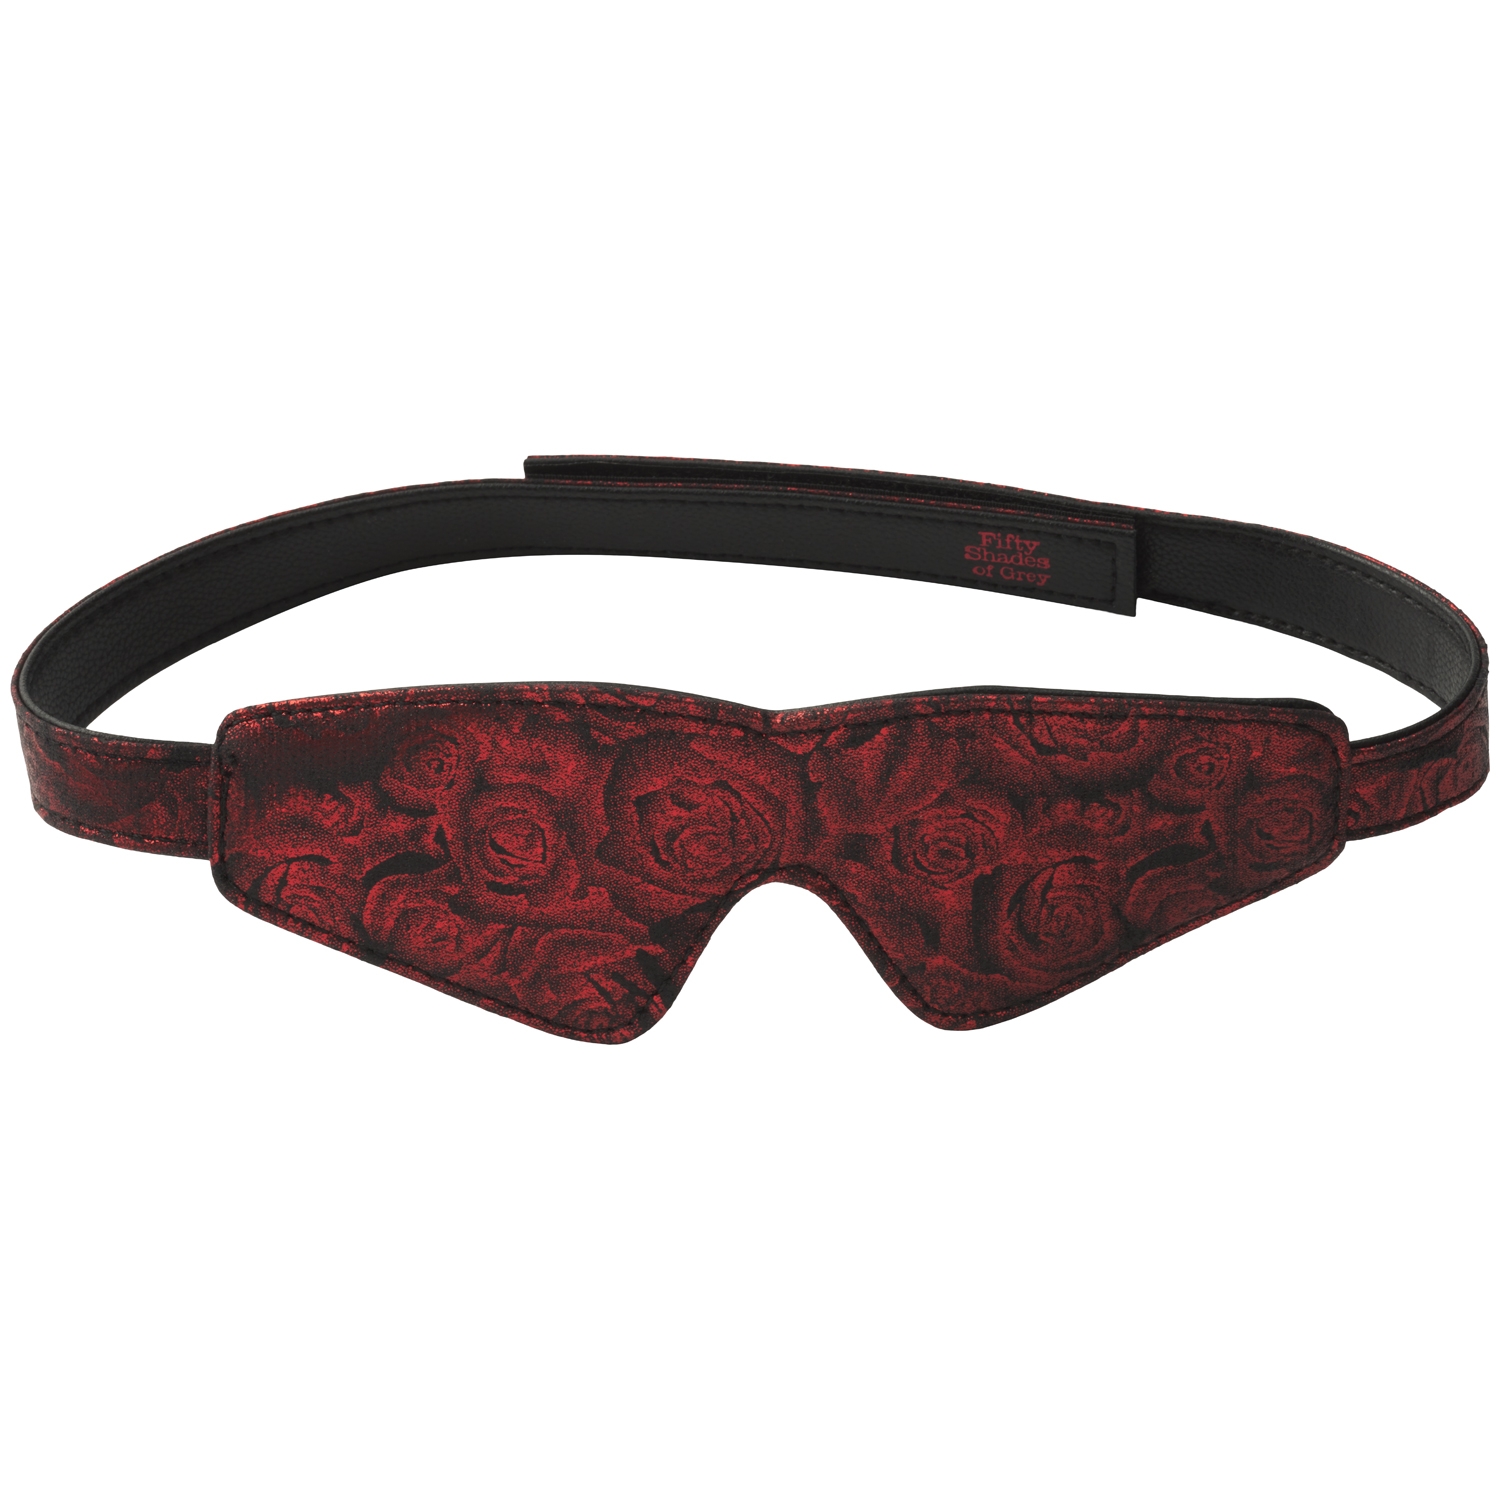 Fifty Shades of Grey Sweet Anticipation Blindfold - Red thumbnail